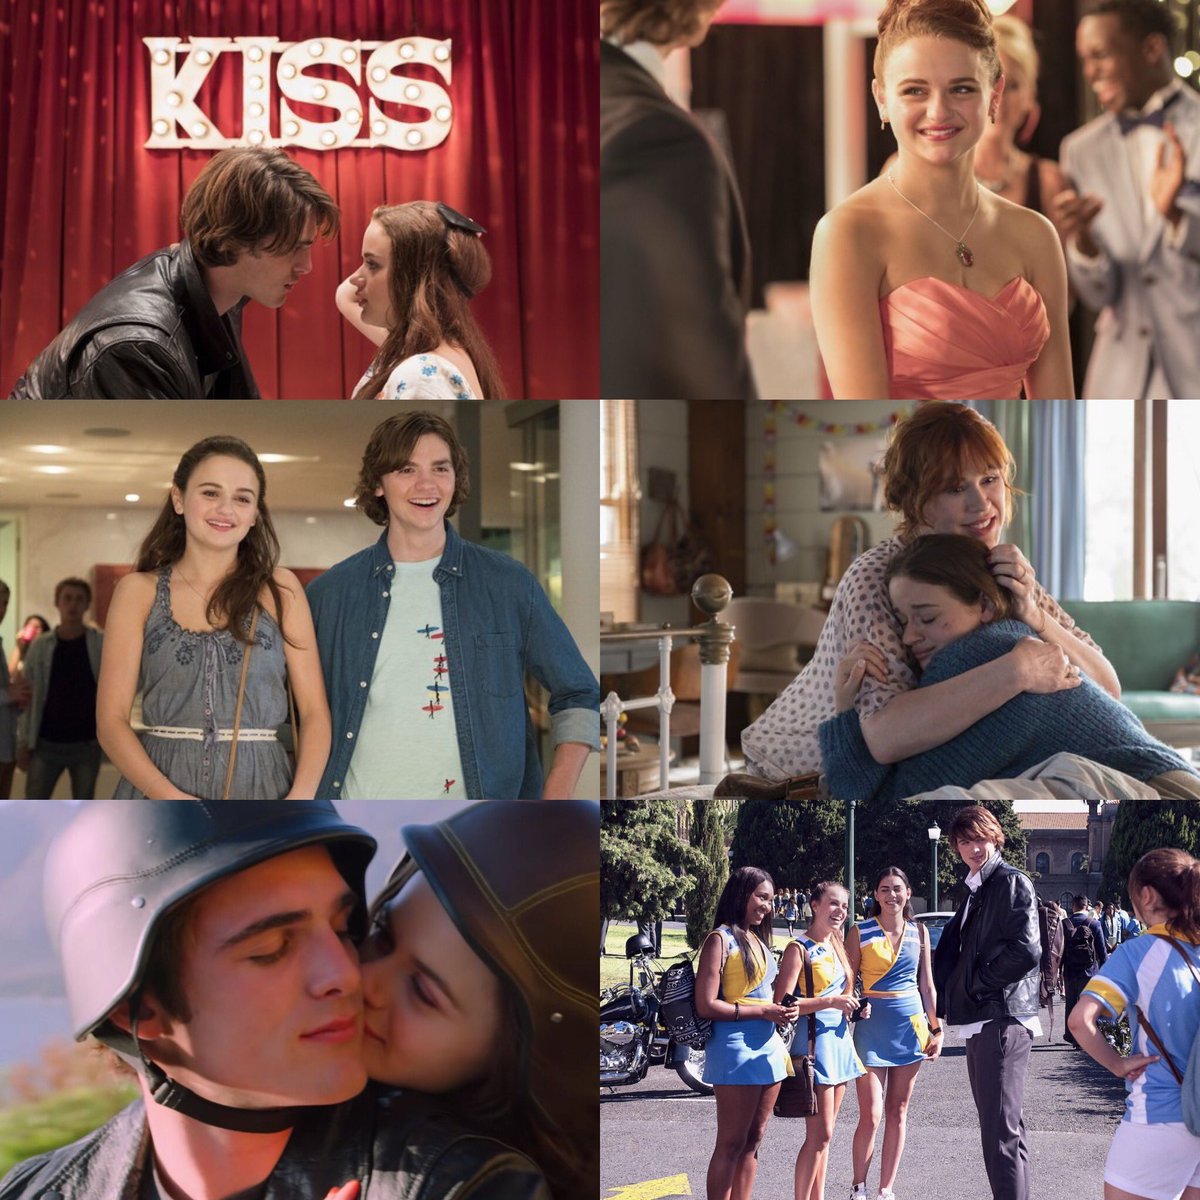 ‘THE KISSING BOOTH’, starring Joey King and Jacob Elordi, premiered On This Day in 2018. #TheKissingBooth